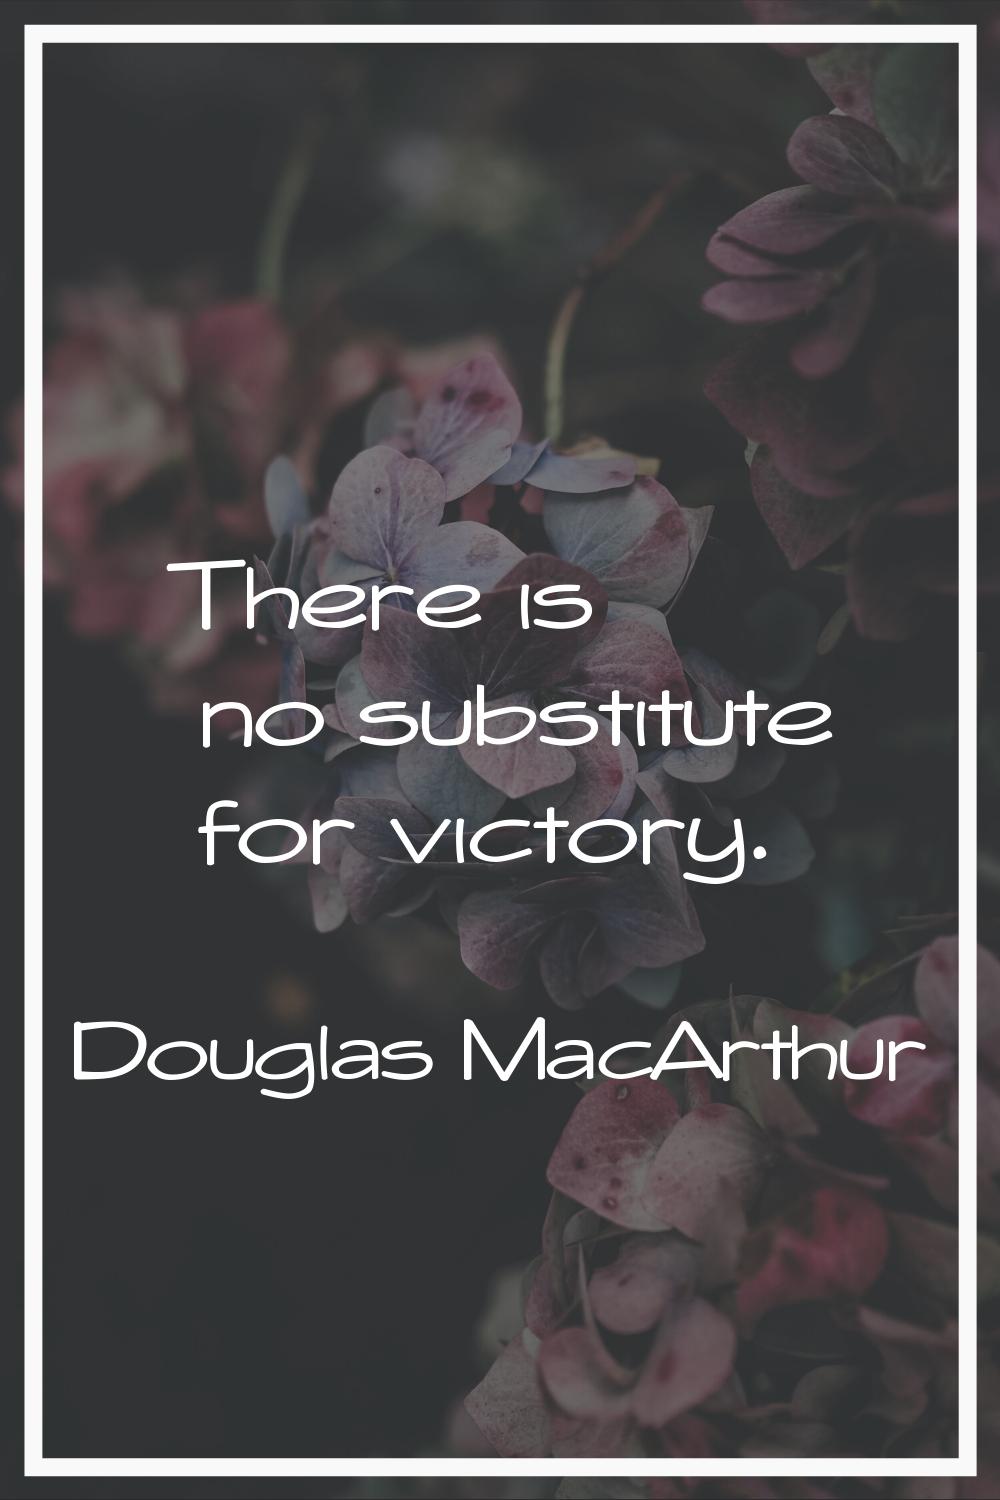 There is no substitute for victory.